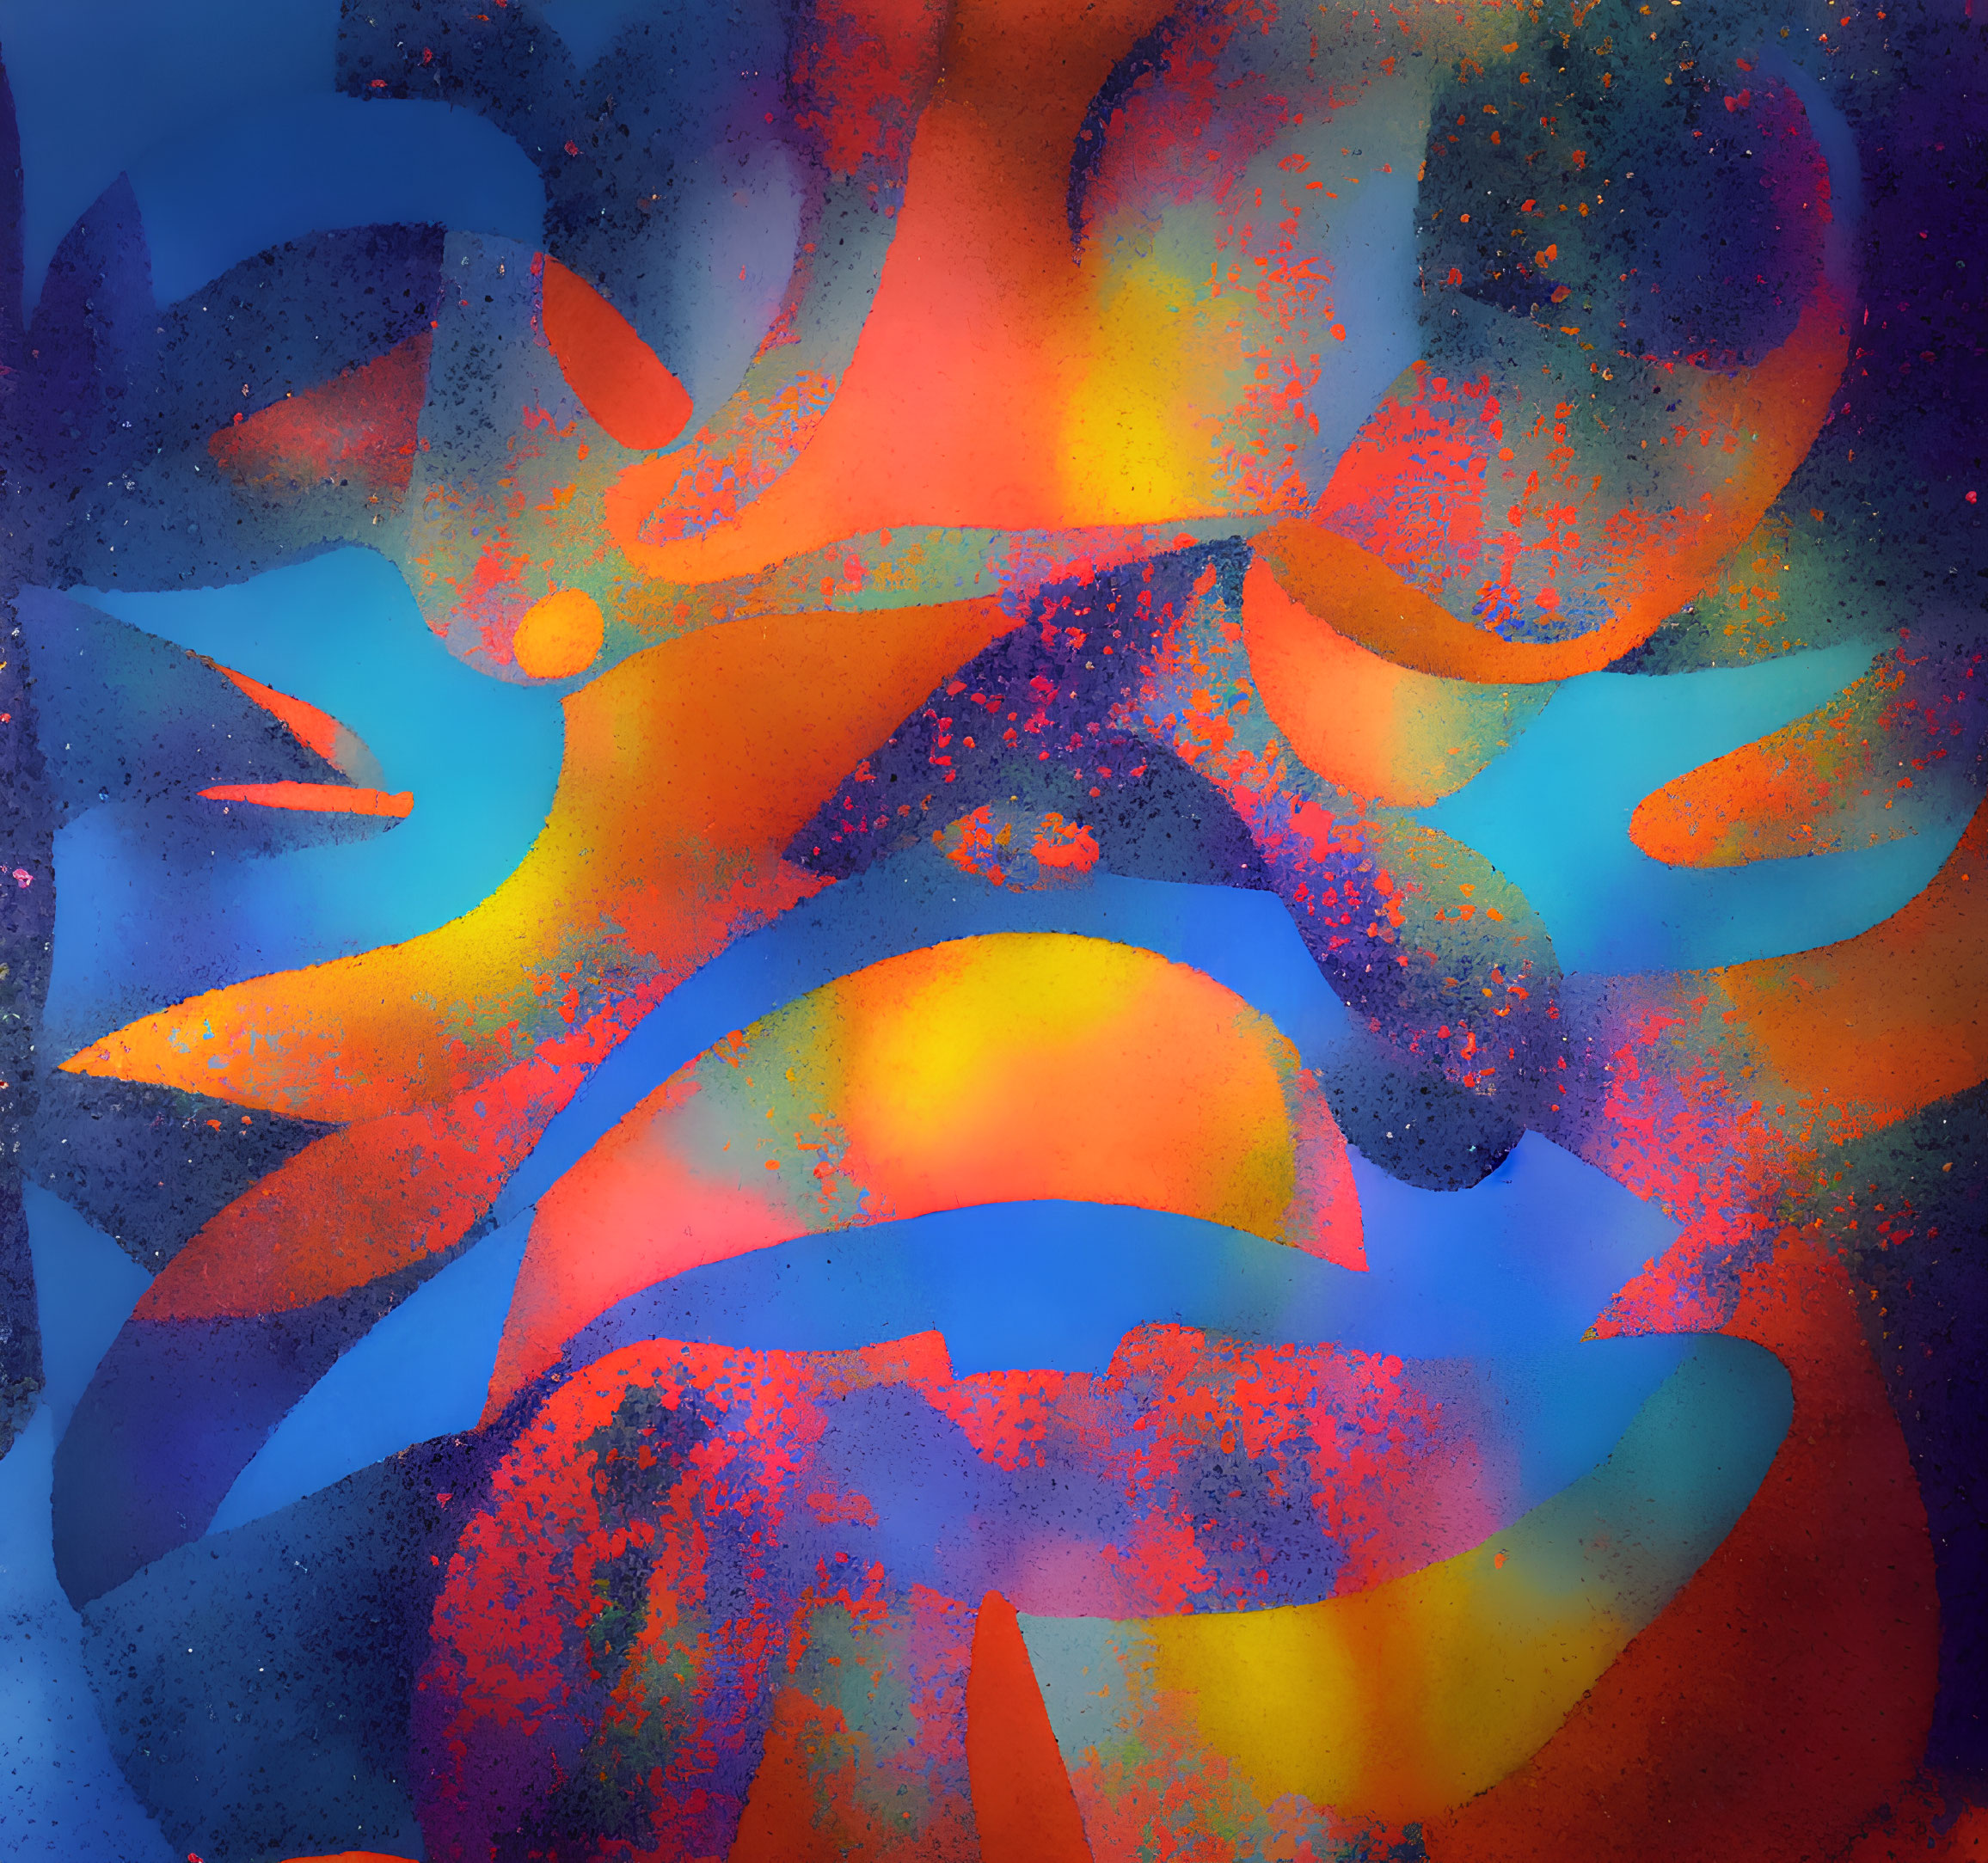 Vibrant Blue, Orange, and Yellow Abstract Artwork with Speckled Textures